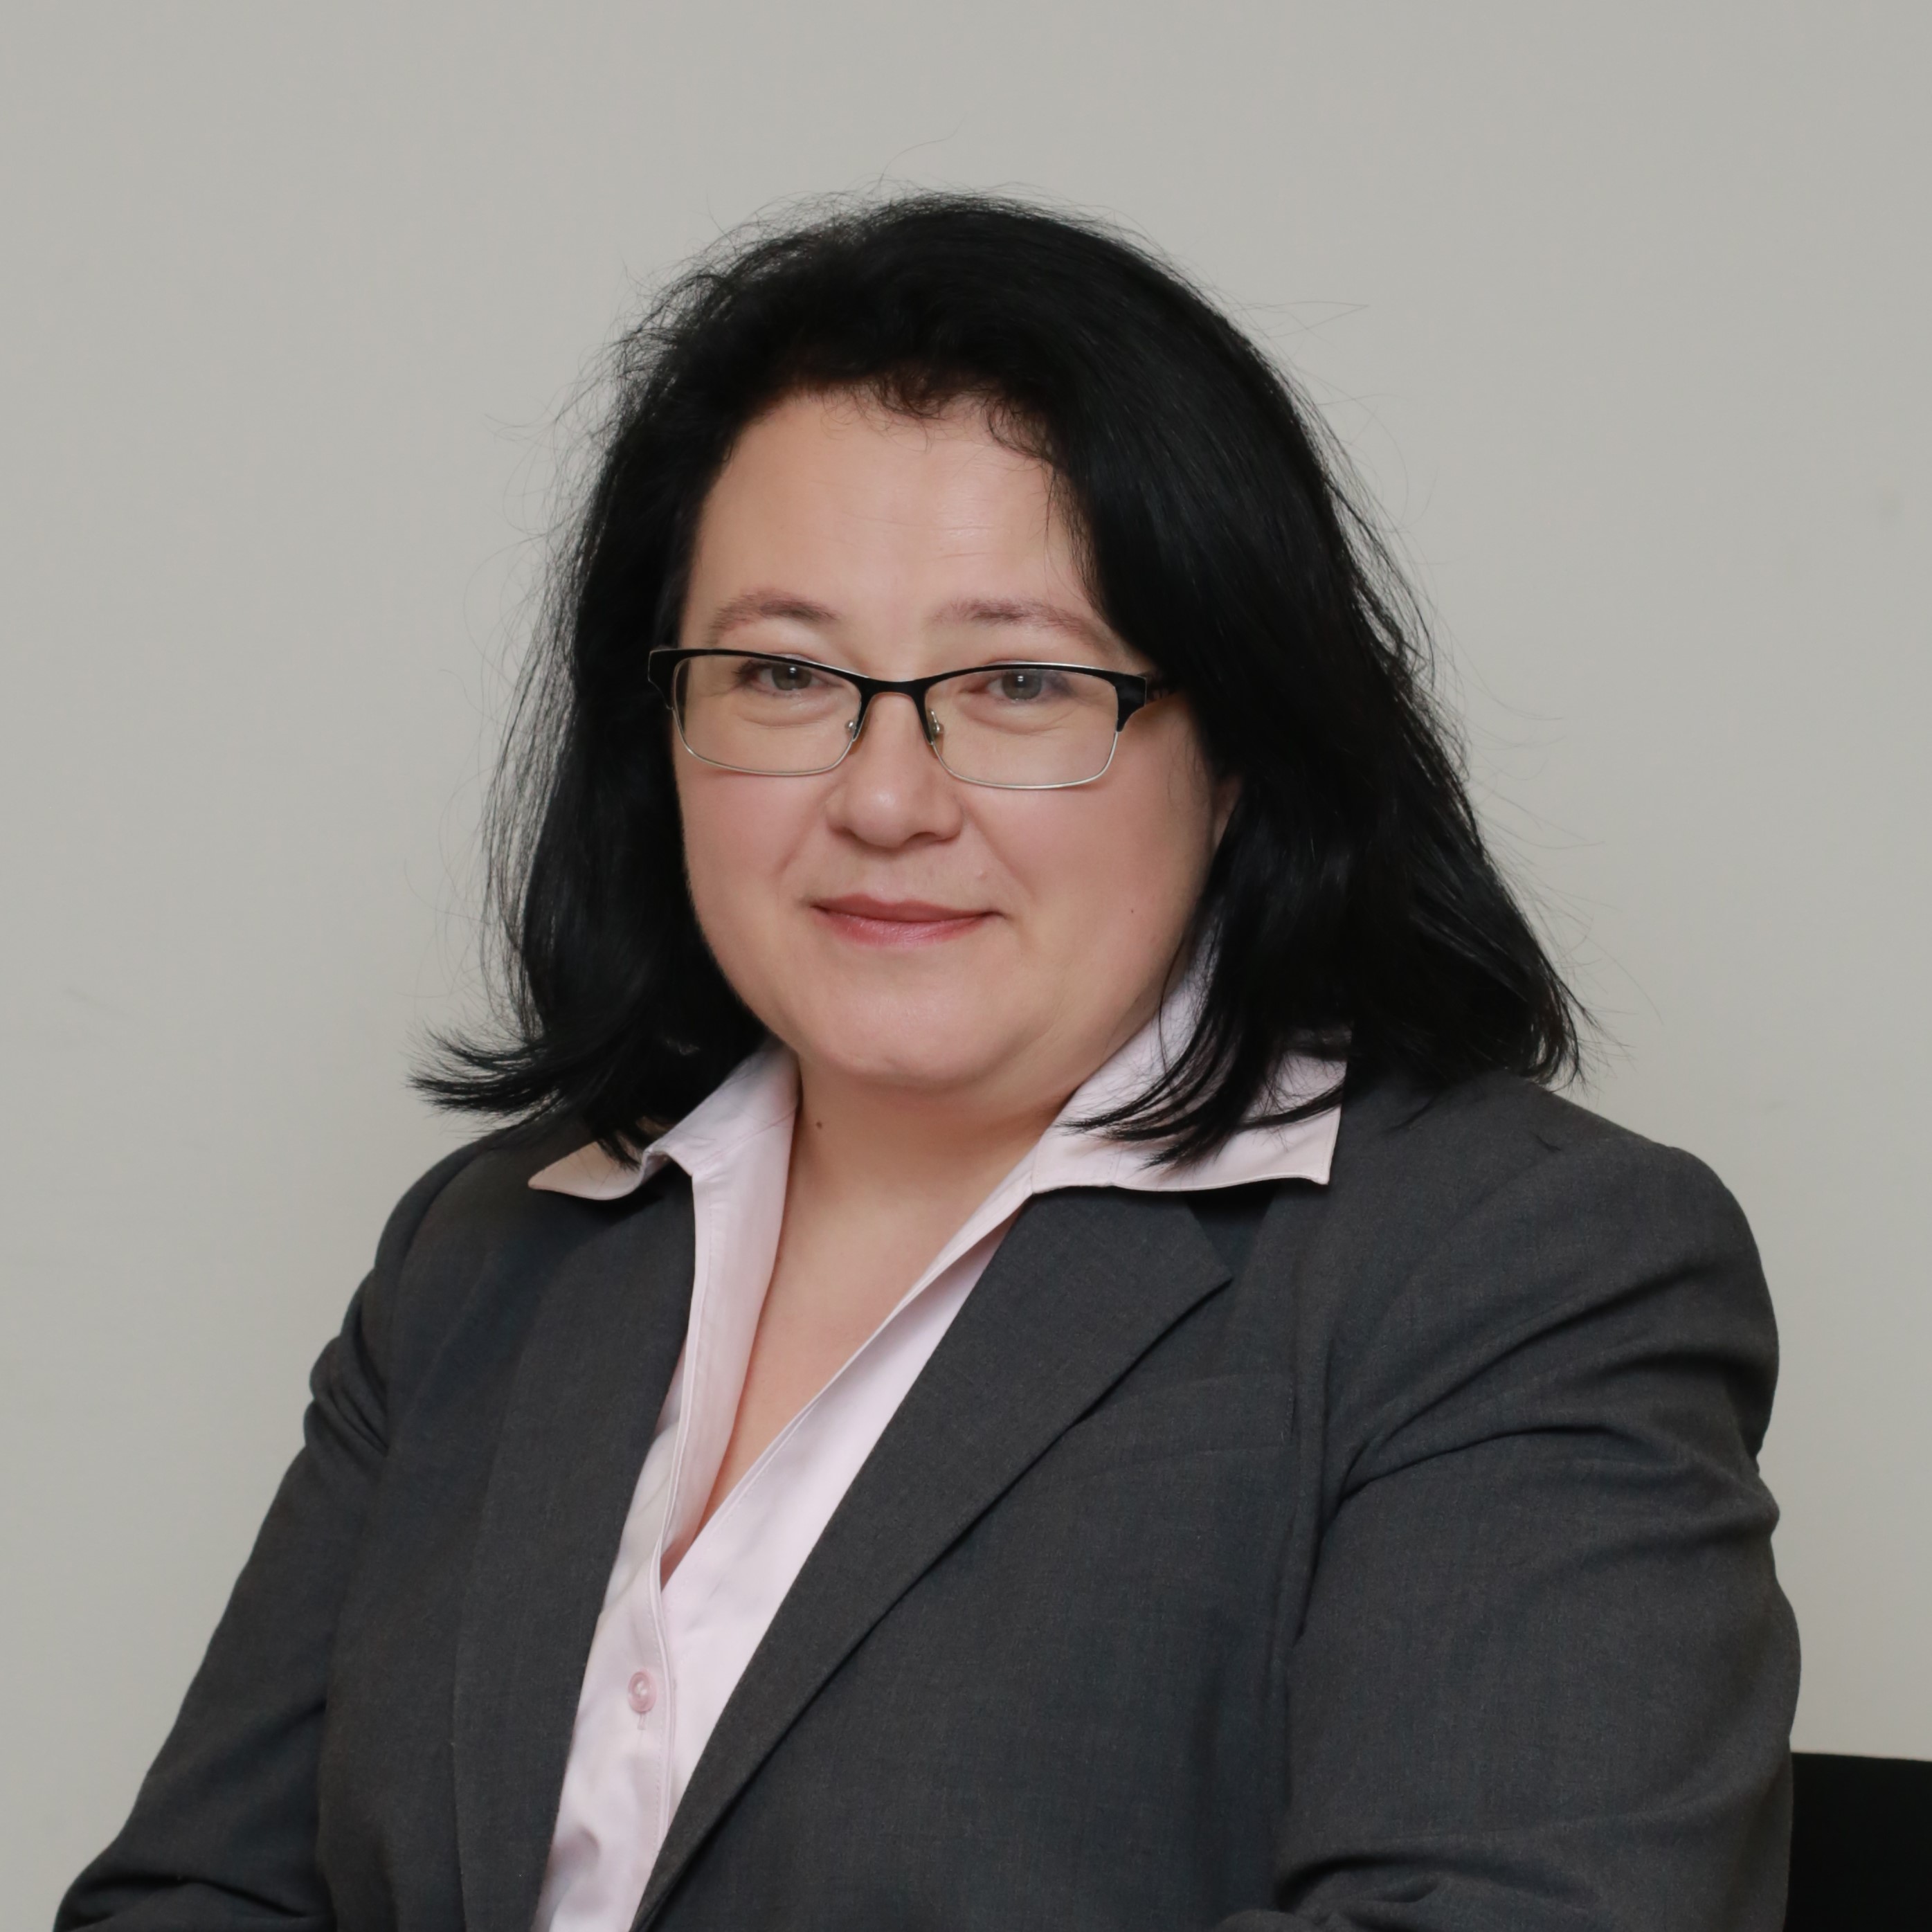 Senior Lecturer, Director of the Center for Economic and Financial Research Natalya Volchkova